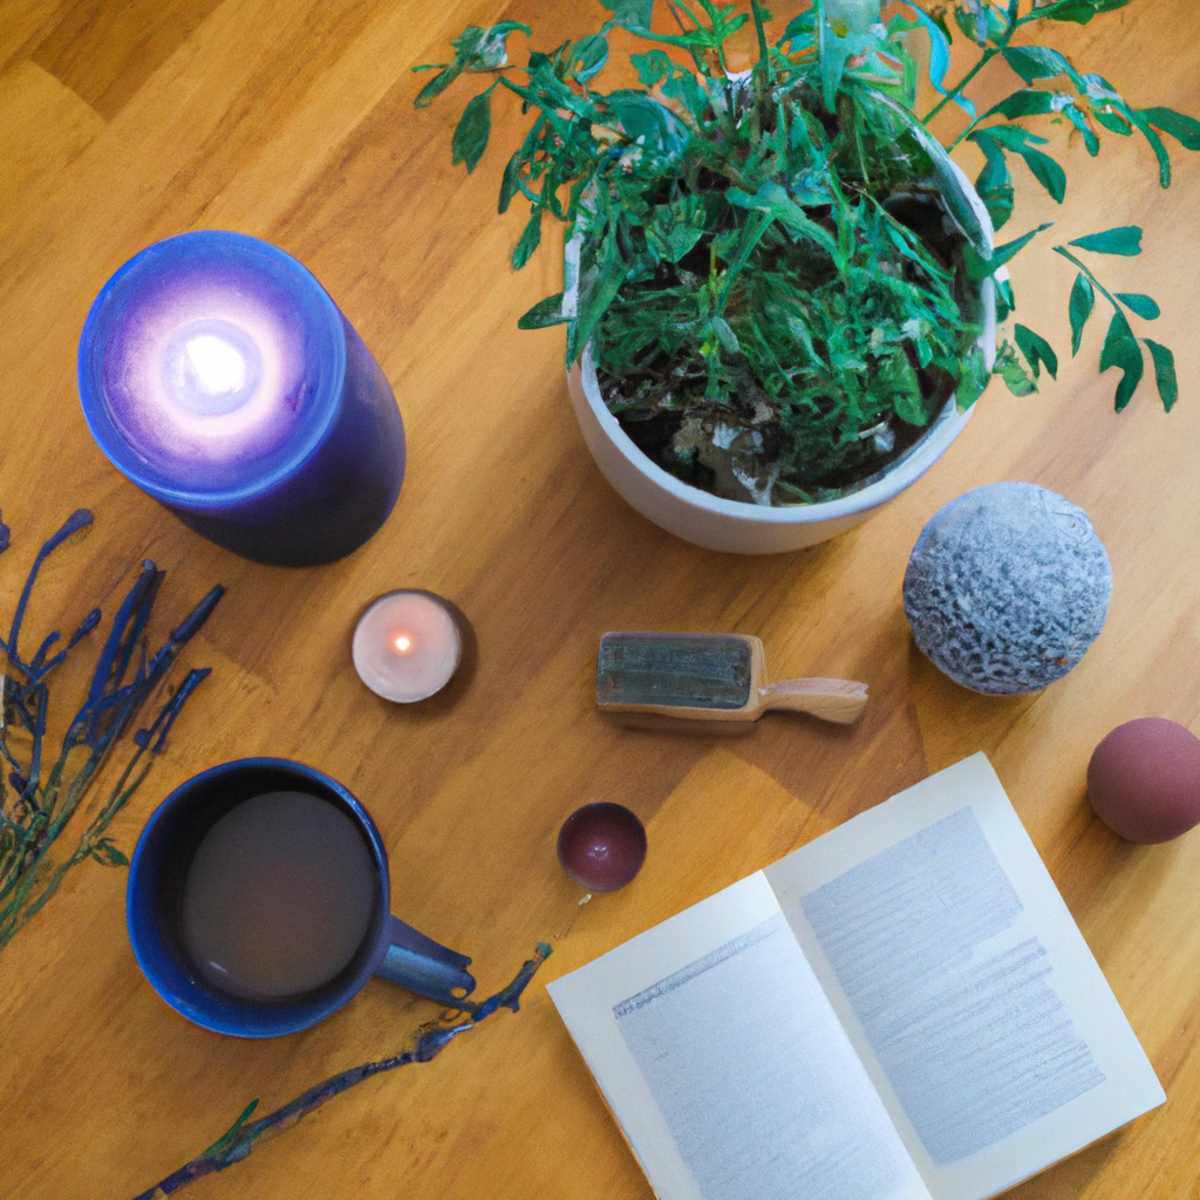 Effective stress management strategies - Calming scene with plant, book, tea, stress ball, and candle. Natural stress relief techniques.